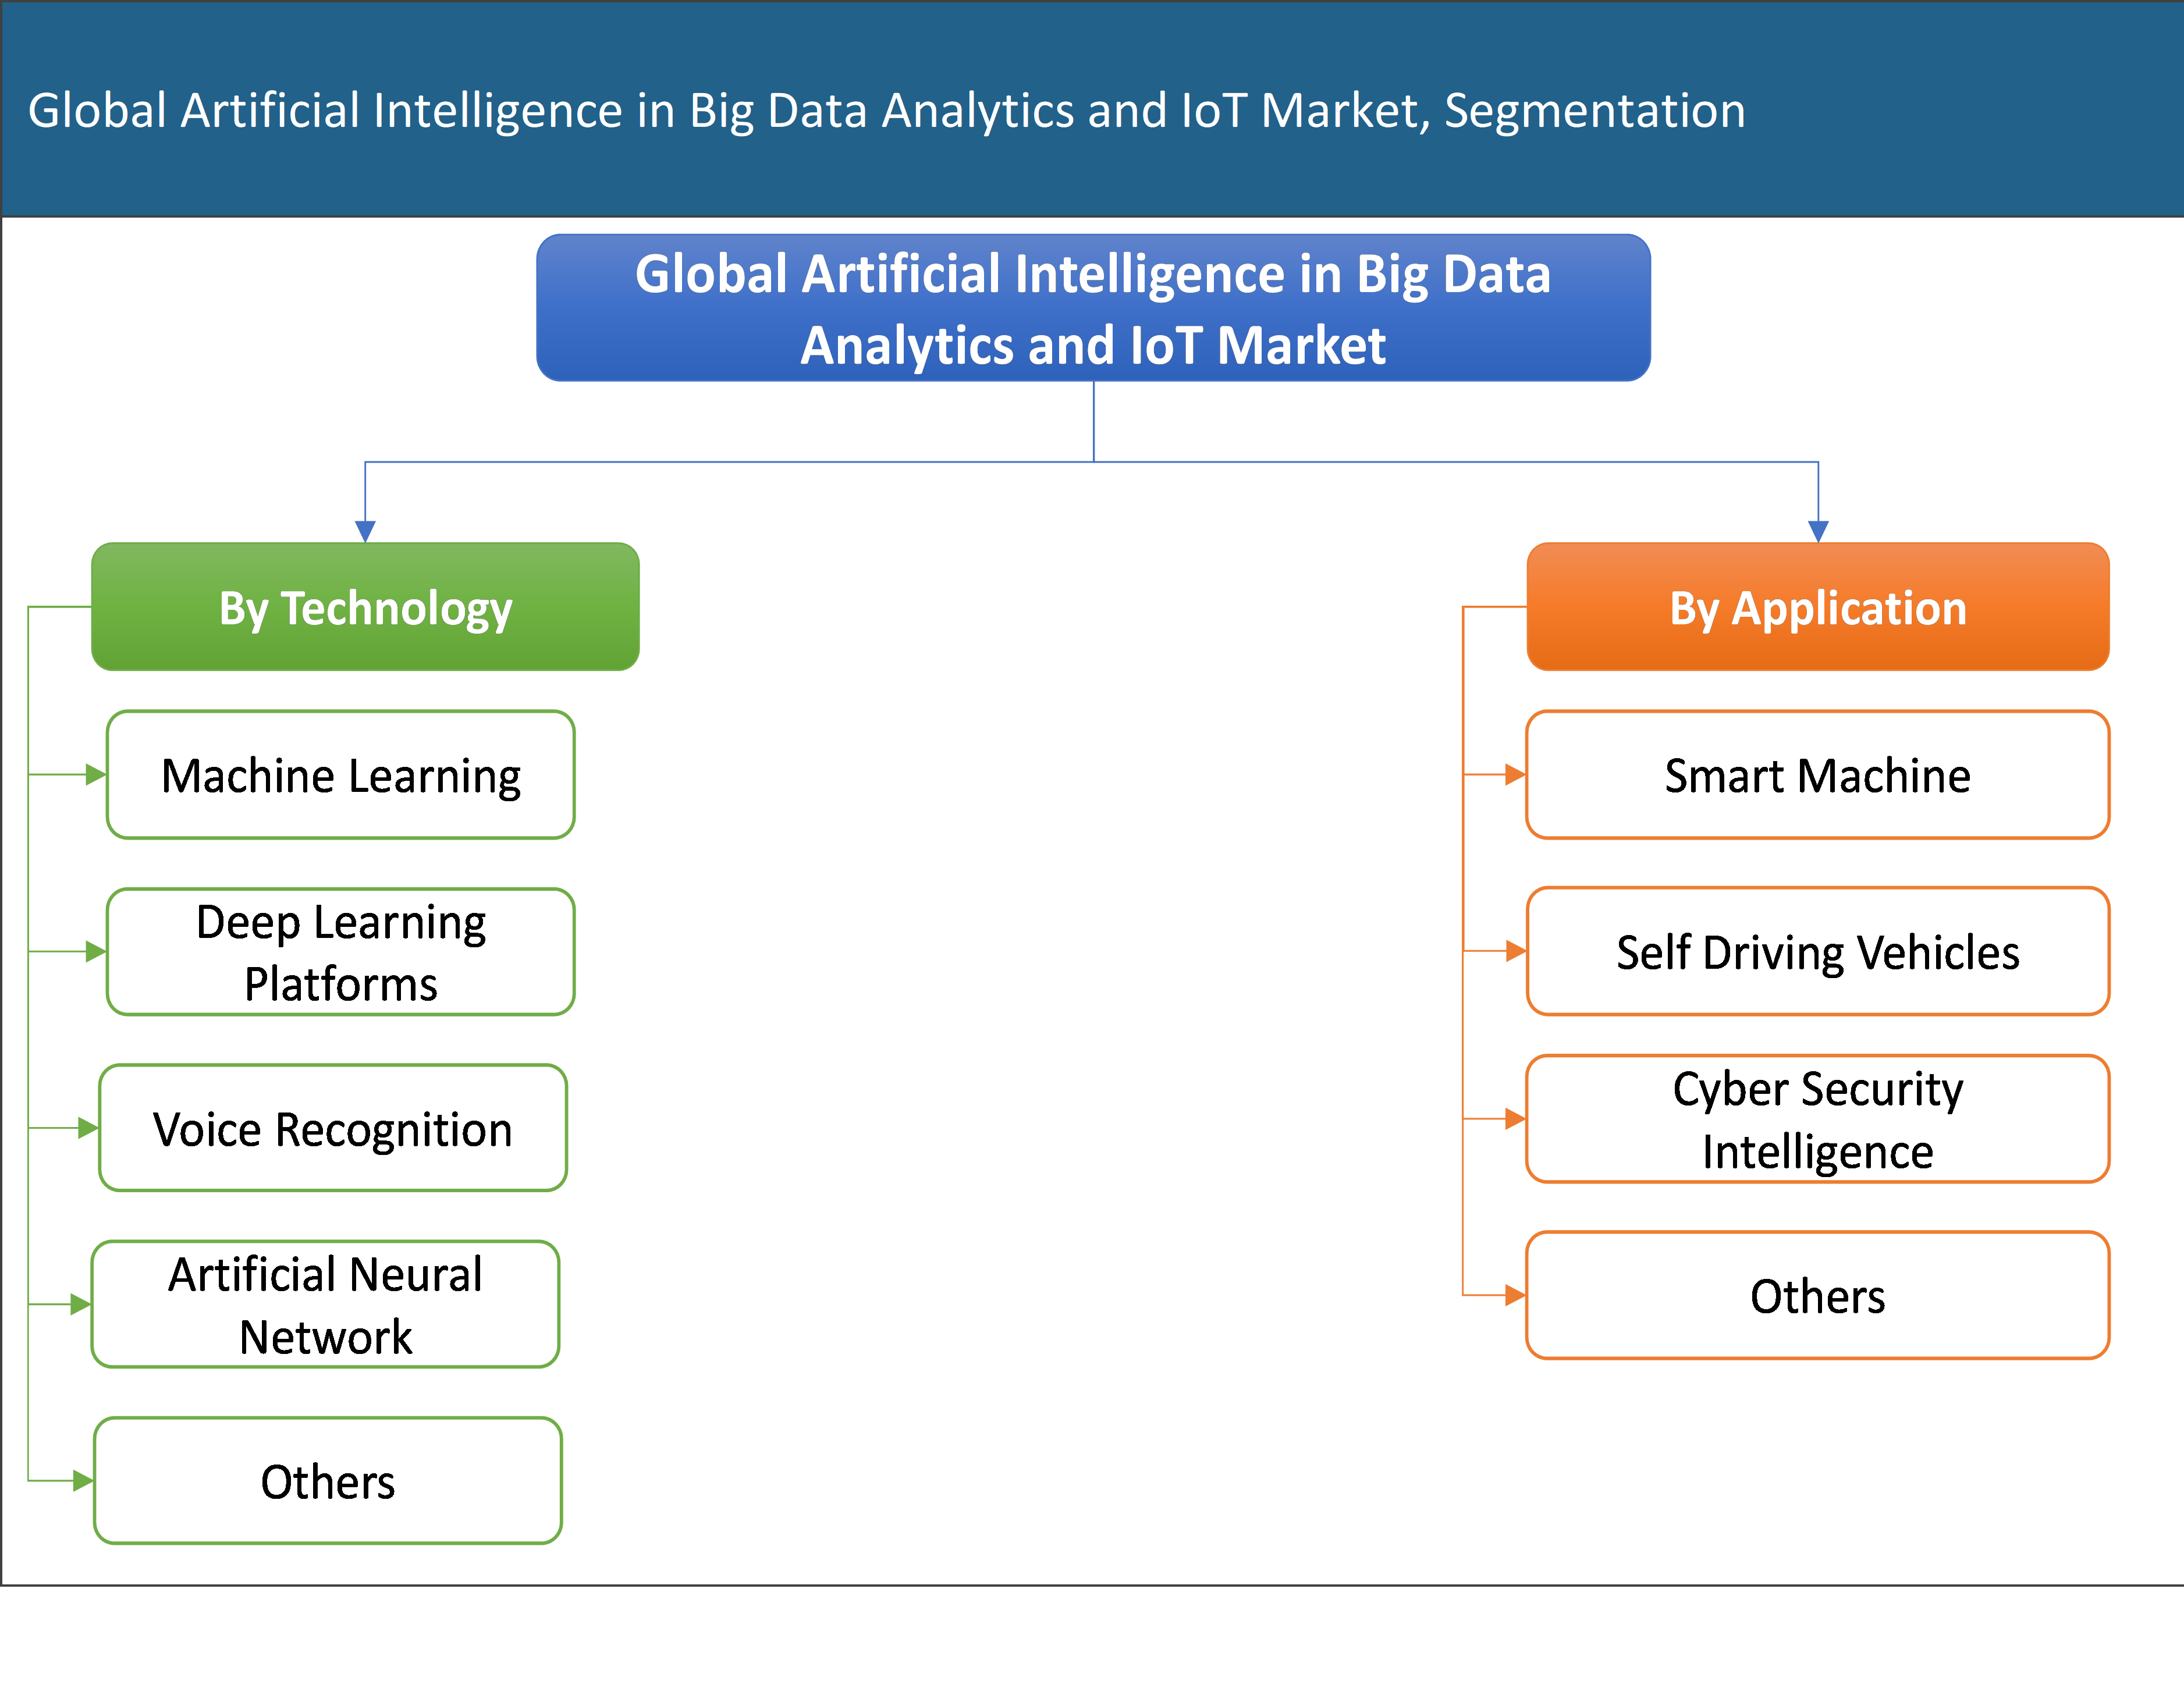 Global Artificial Intelligence in Big Data Analytics and IoT Market